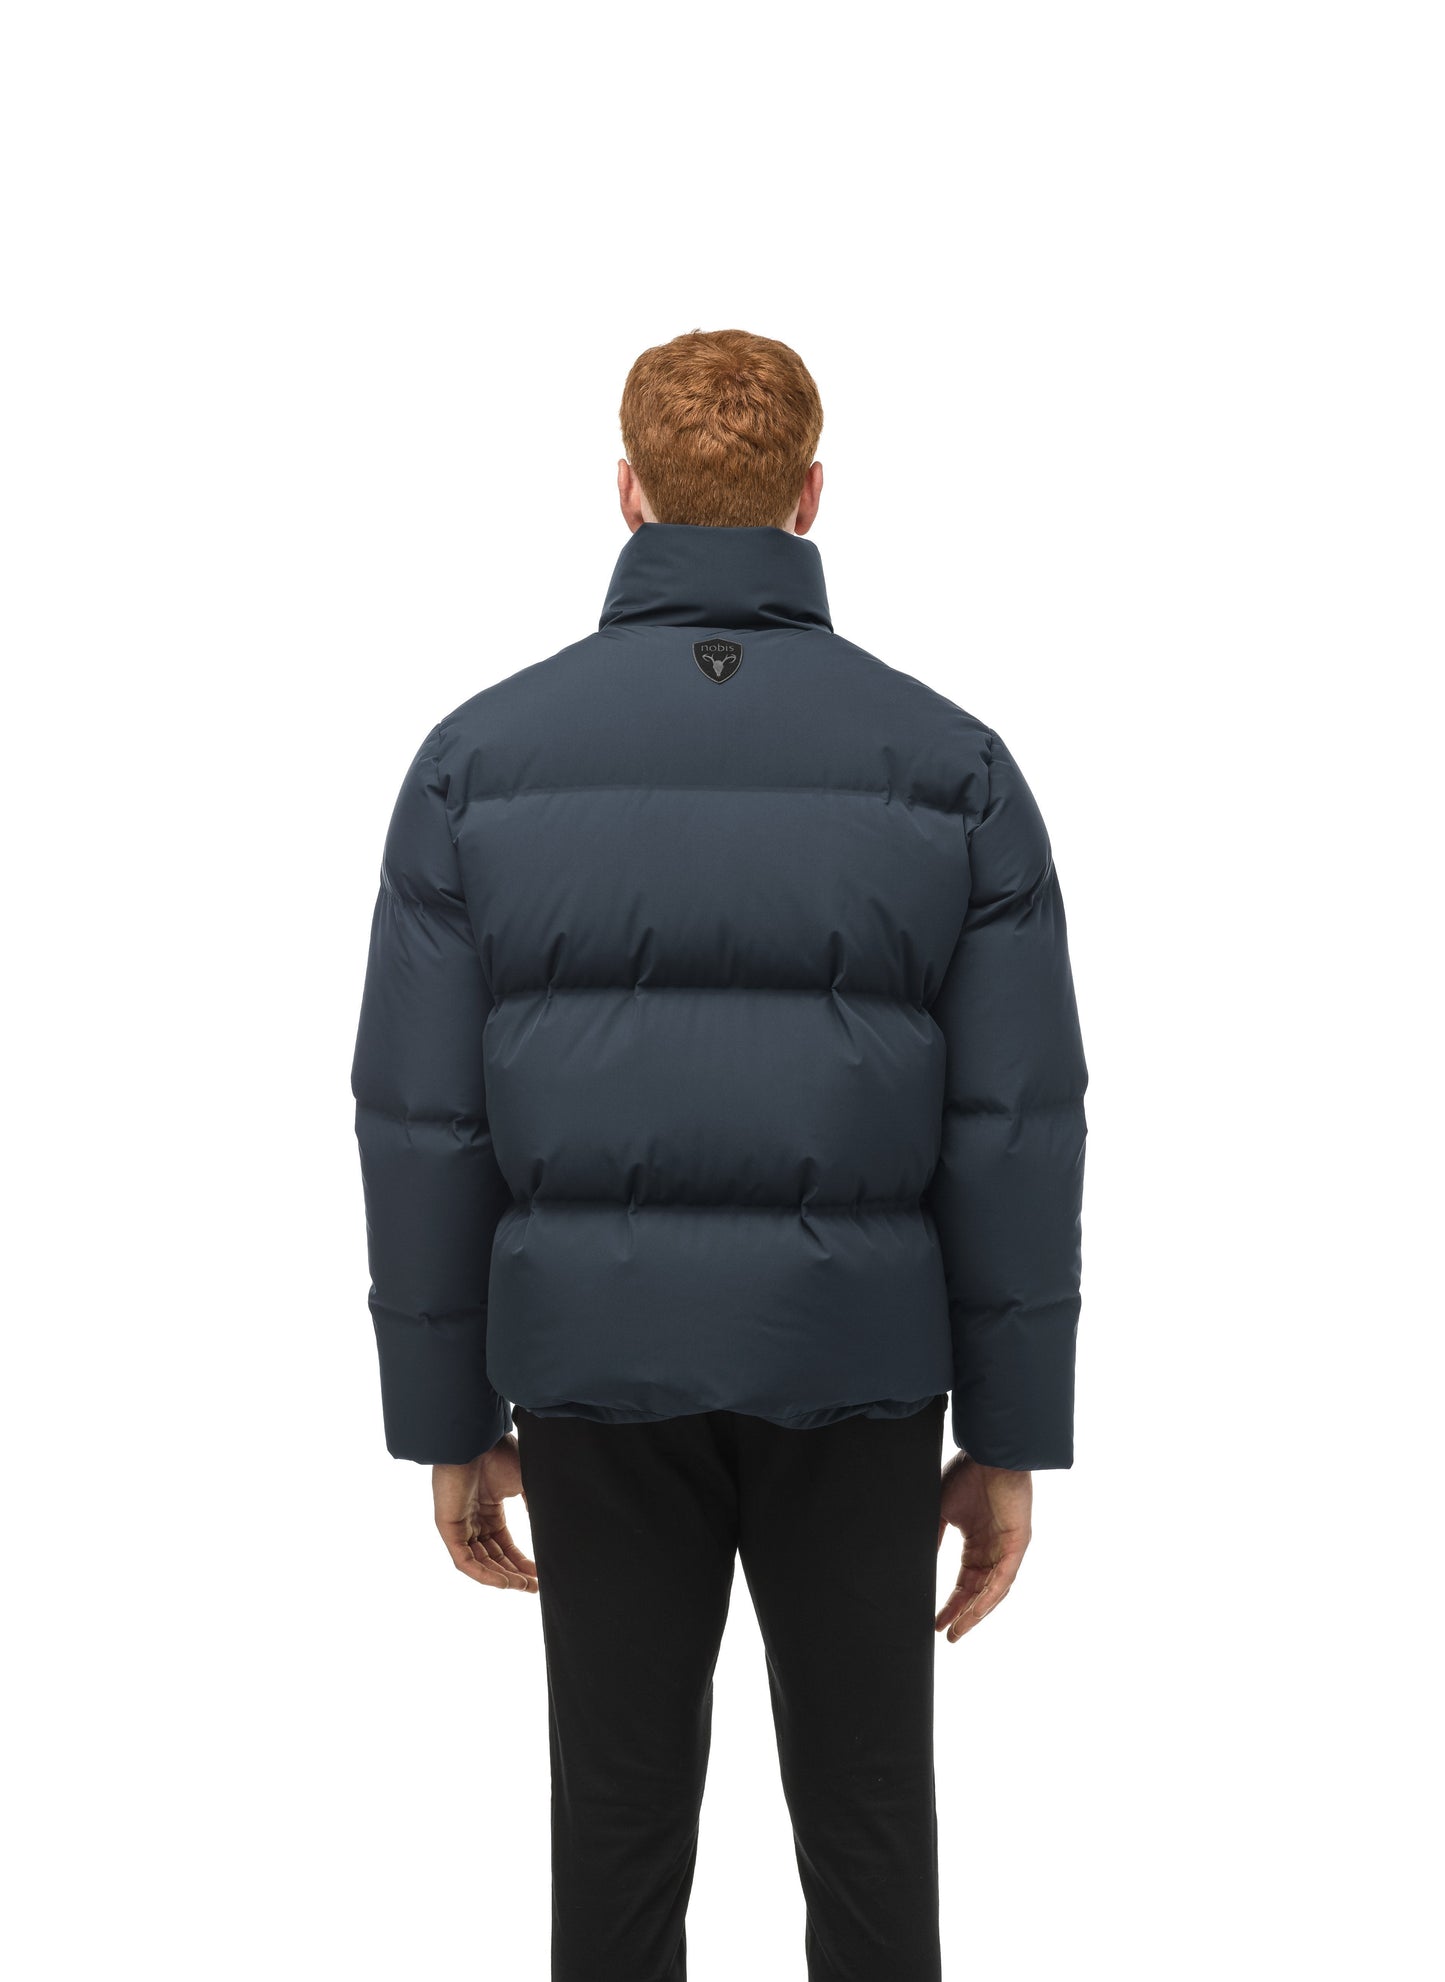 Men's puffer jacket with a minimalist modern design; featuring graphic details like oversized tonal branding, an exposed zipper, and seamless puffer channels in Midnight Blue